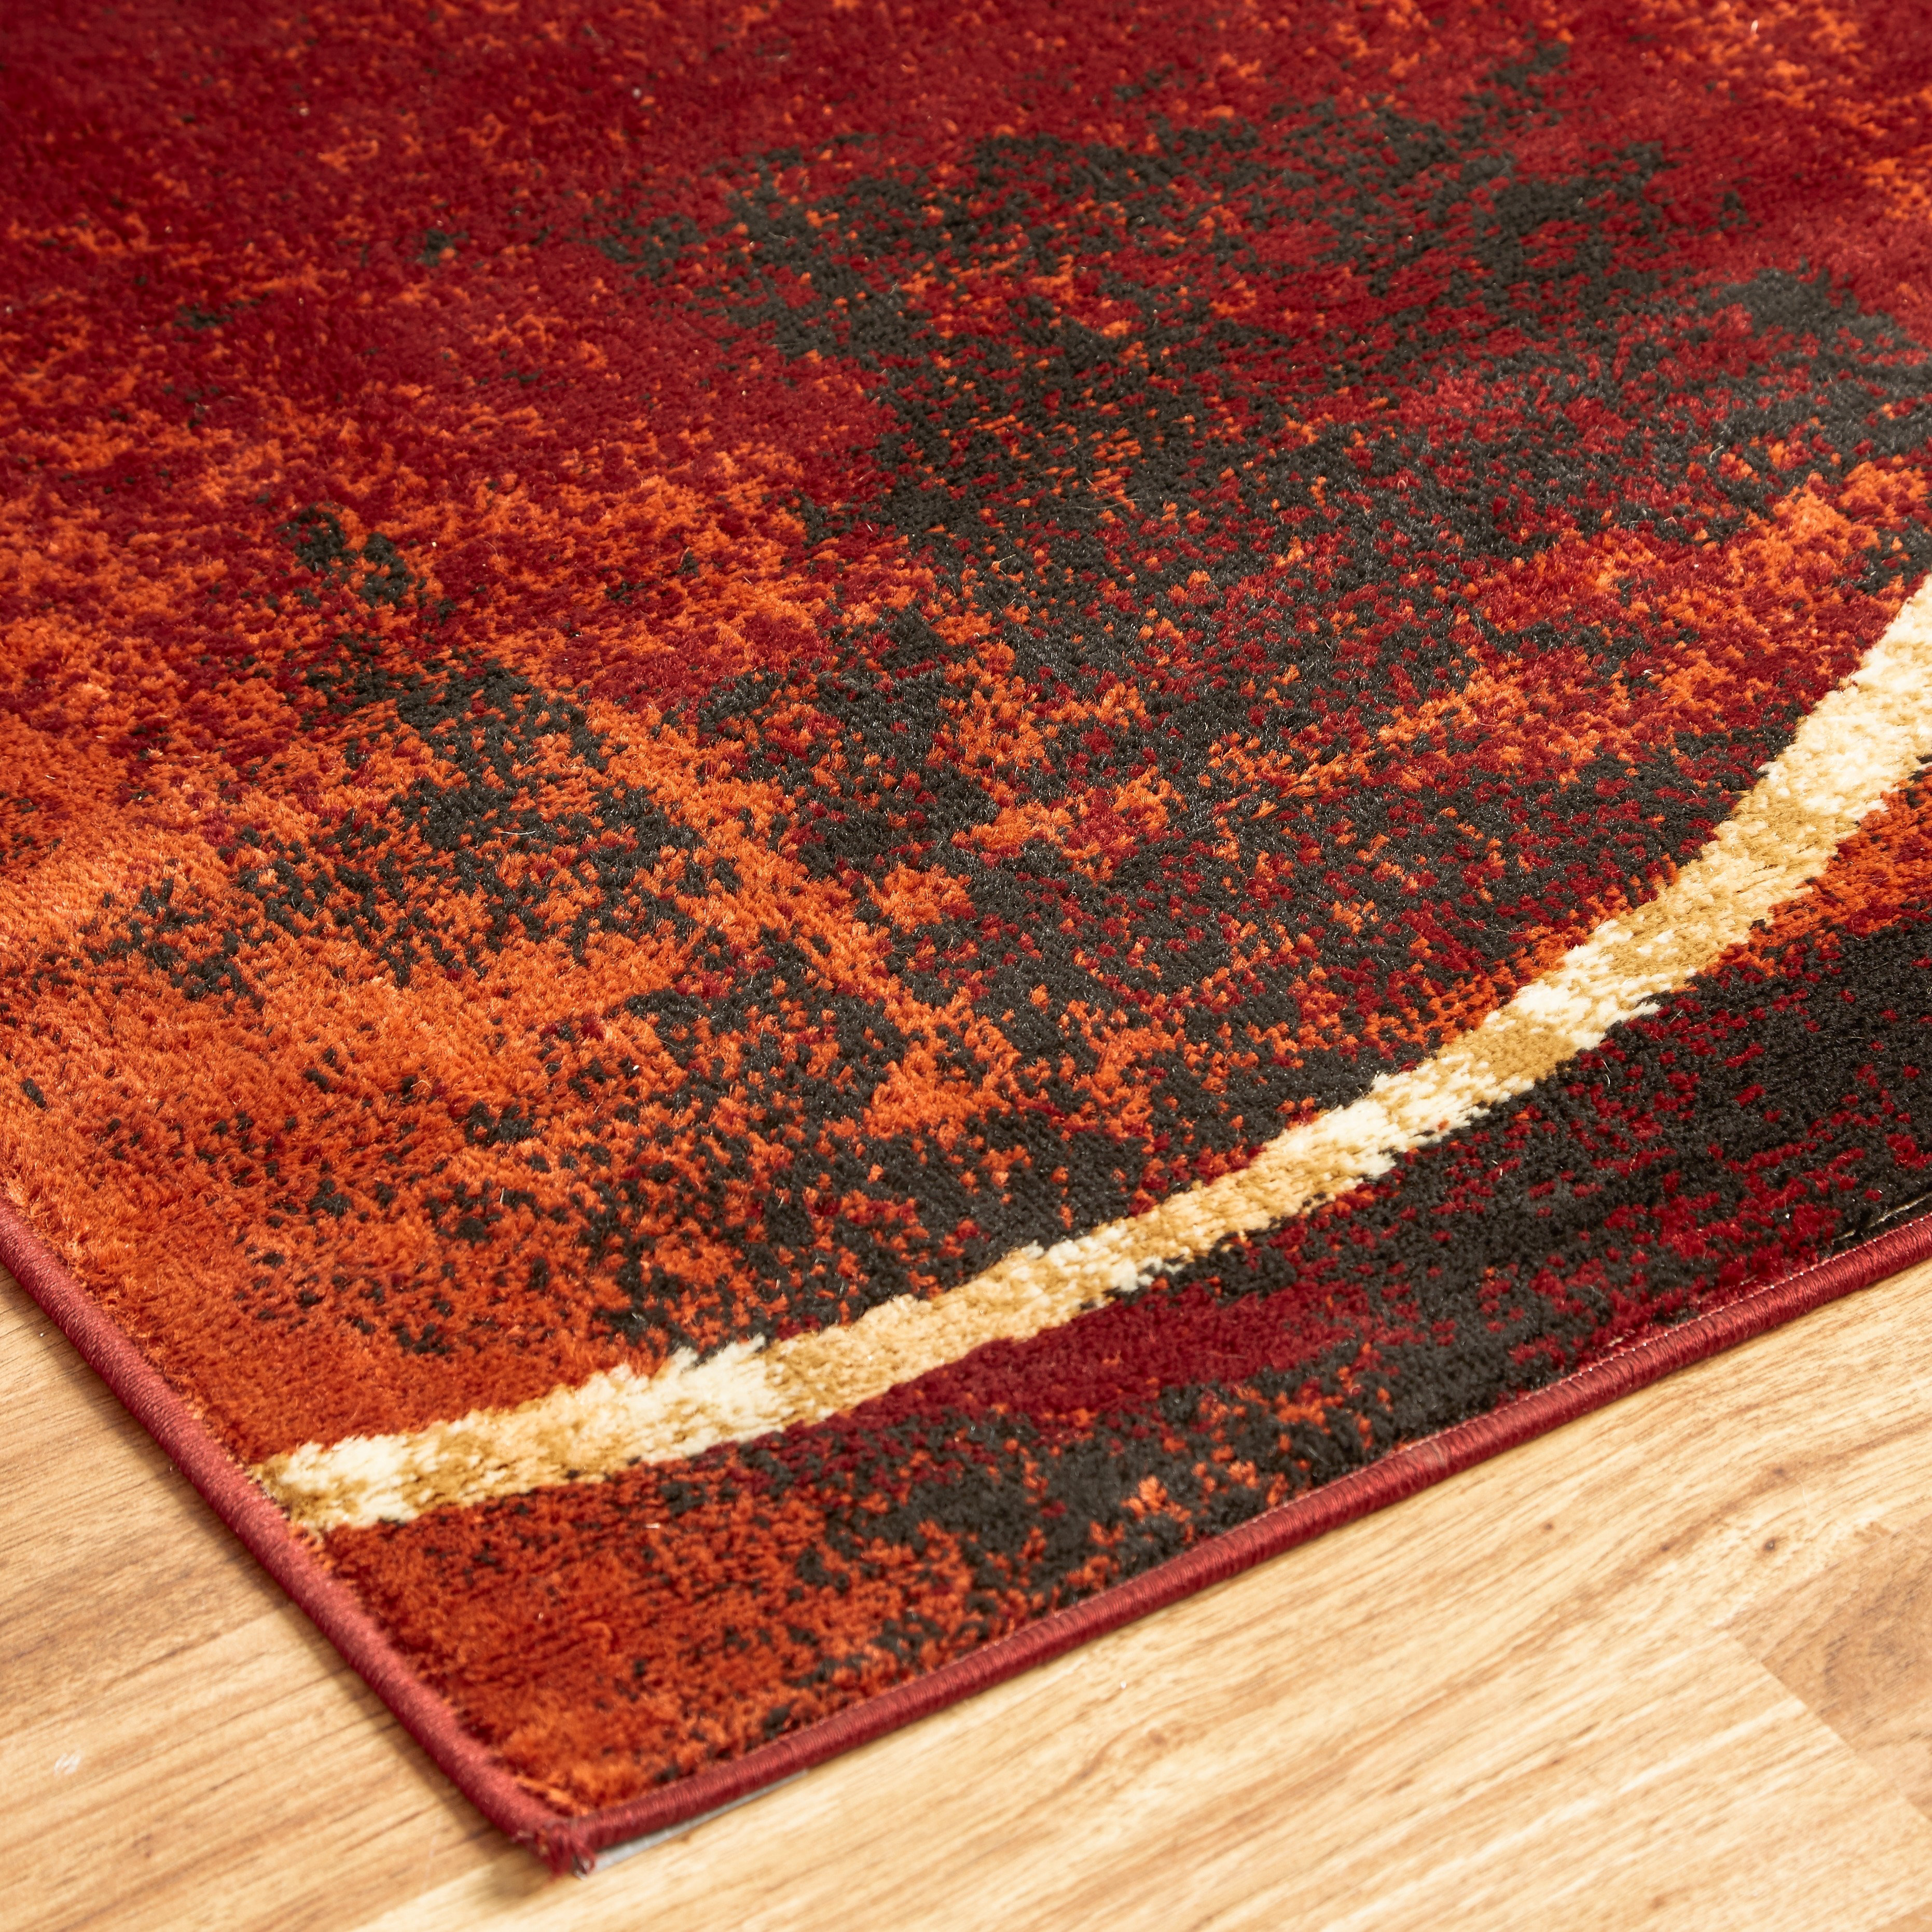 Red And Gold Area Rugs Best Rug 2017